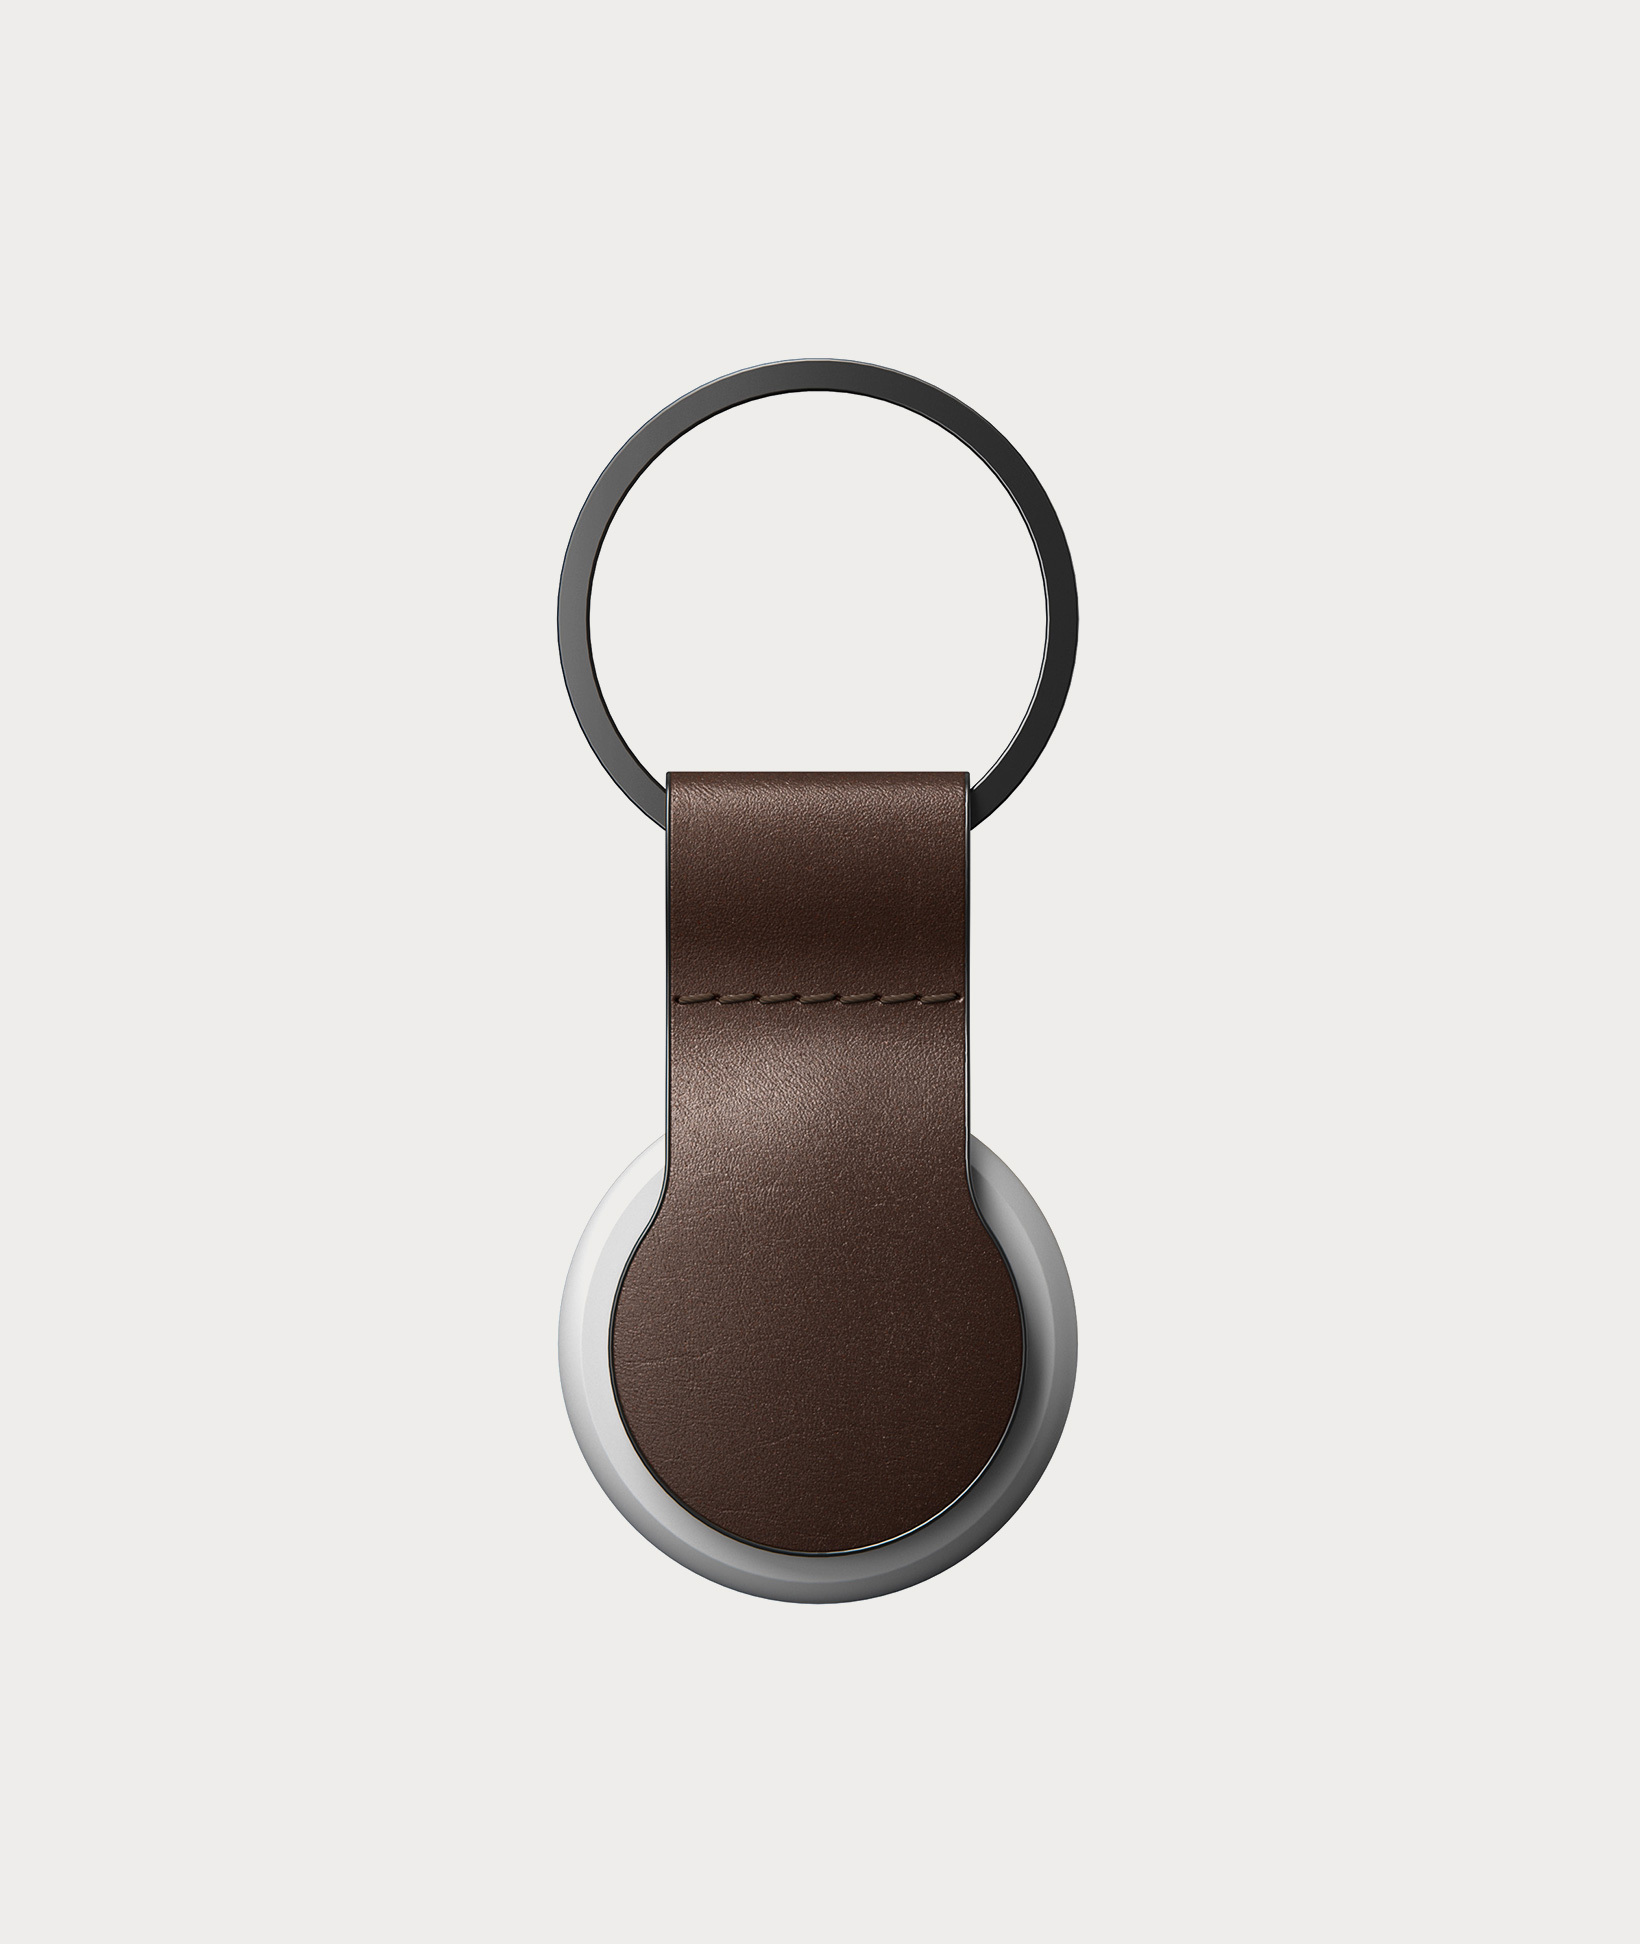 Nomad Leather Loop for AirTags™ - Rustic Brown Leather… - Moment